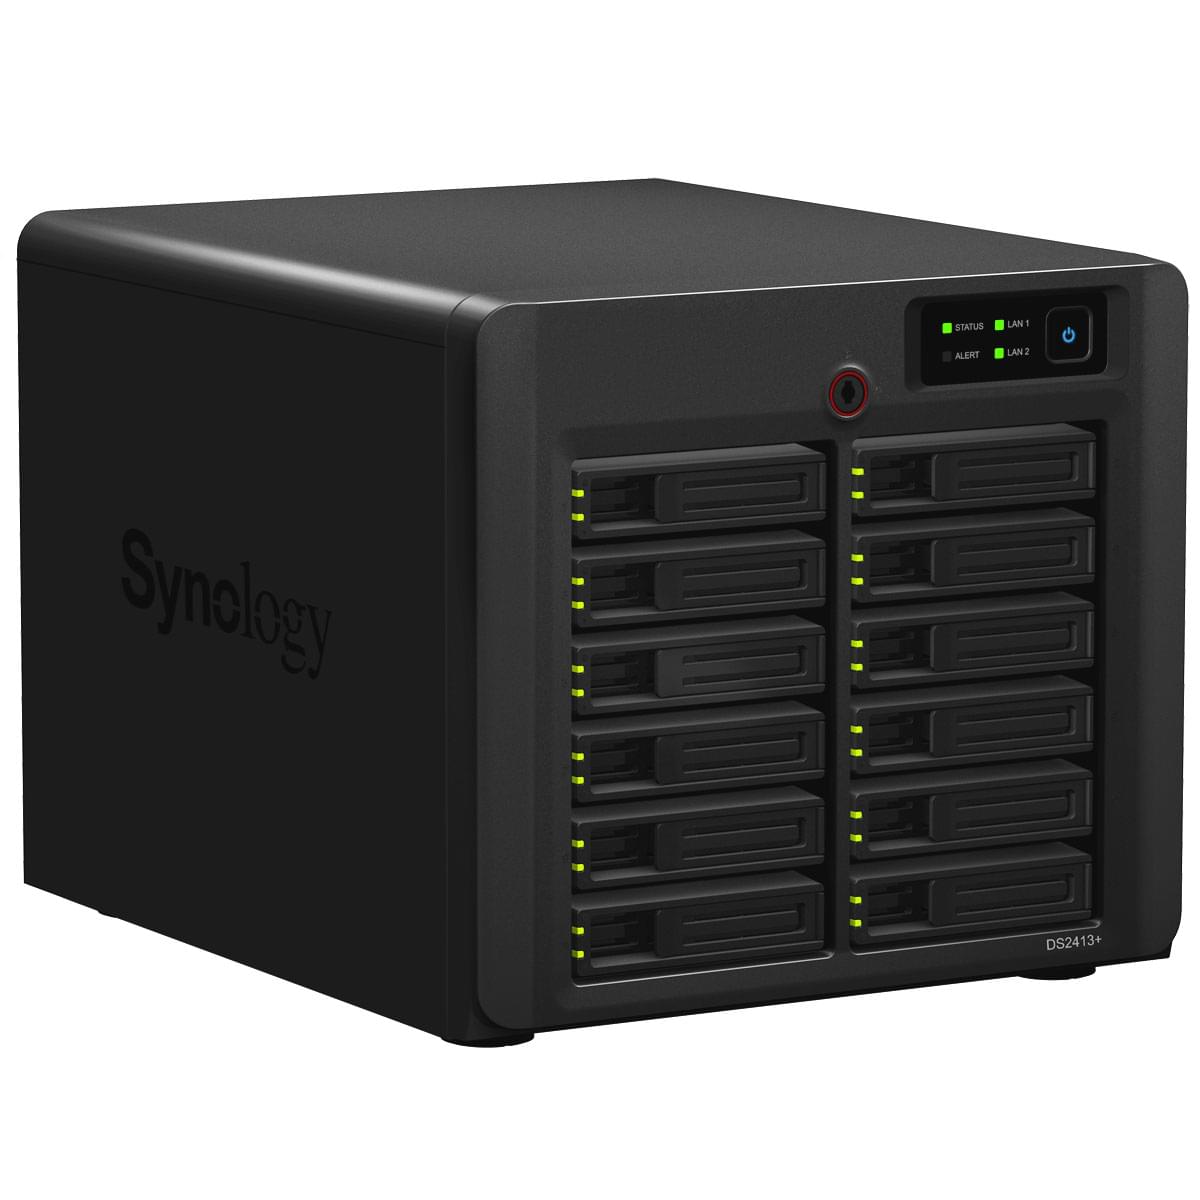 Serveur NAS Synology DS2413+ - 12 HDD